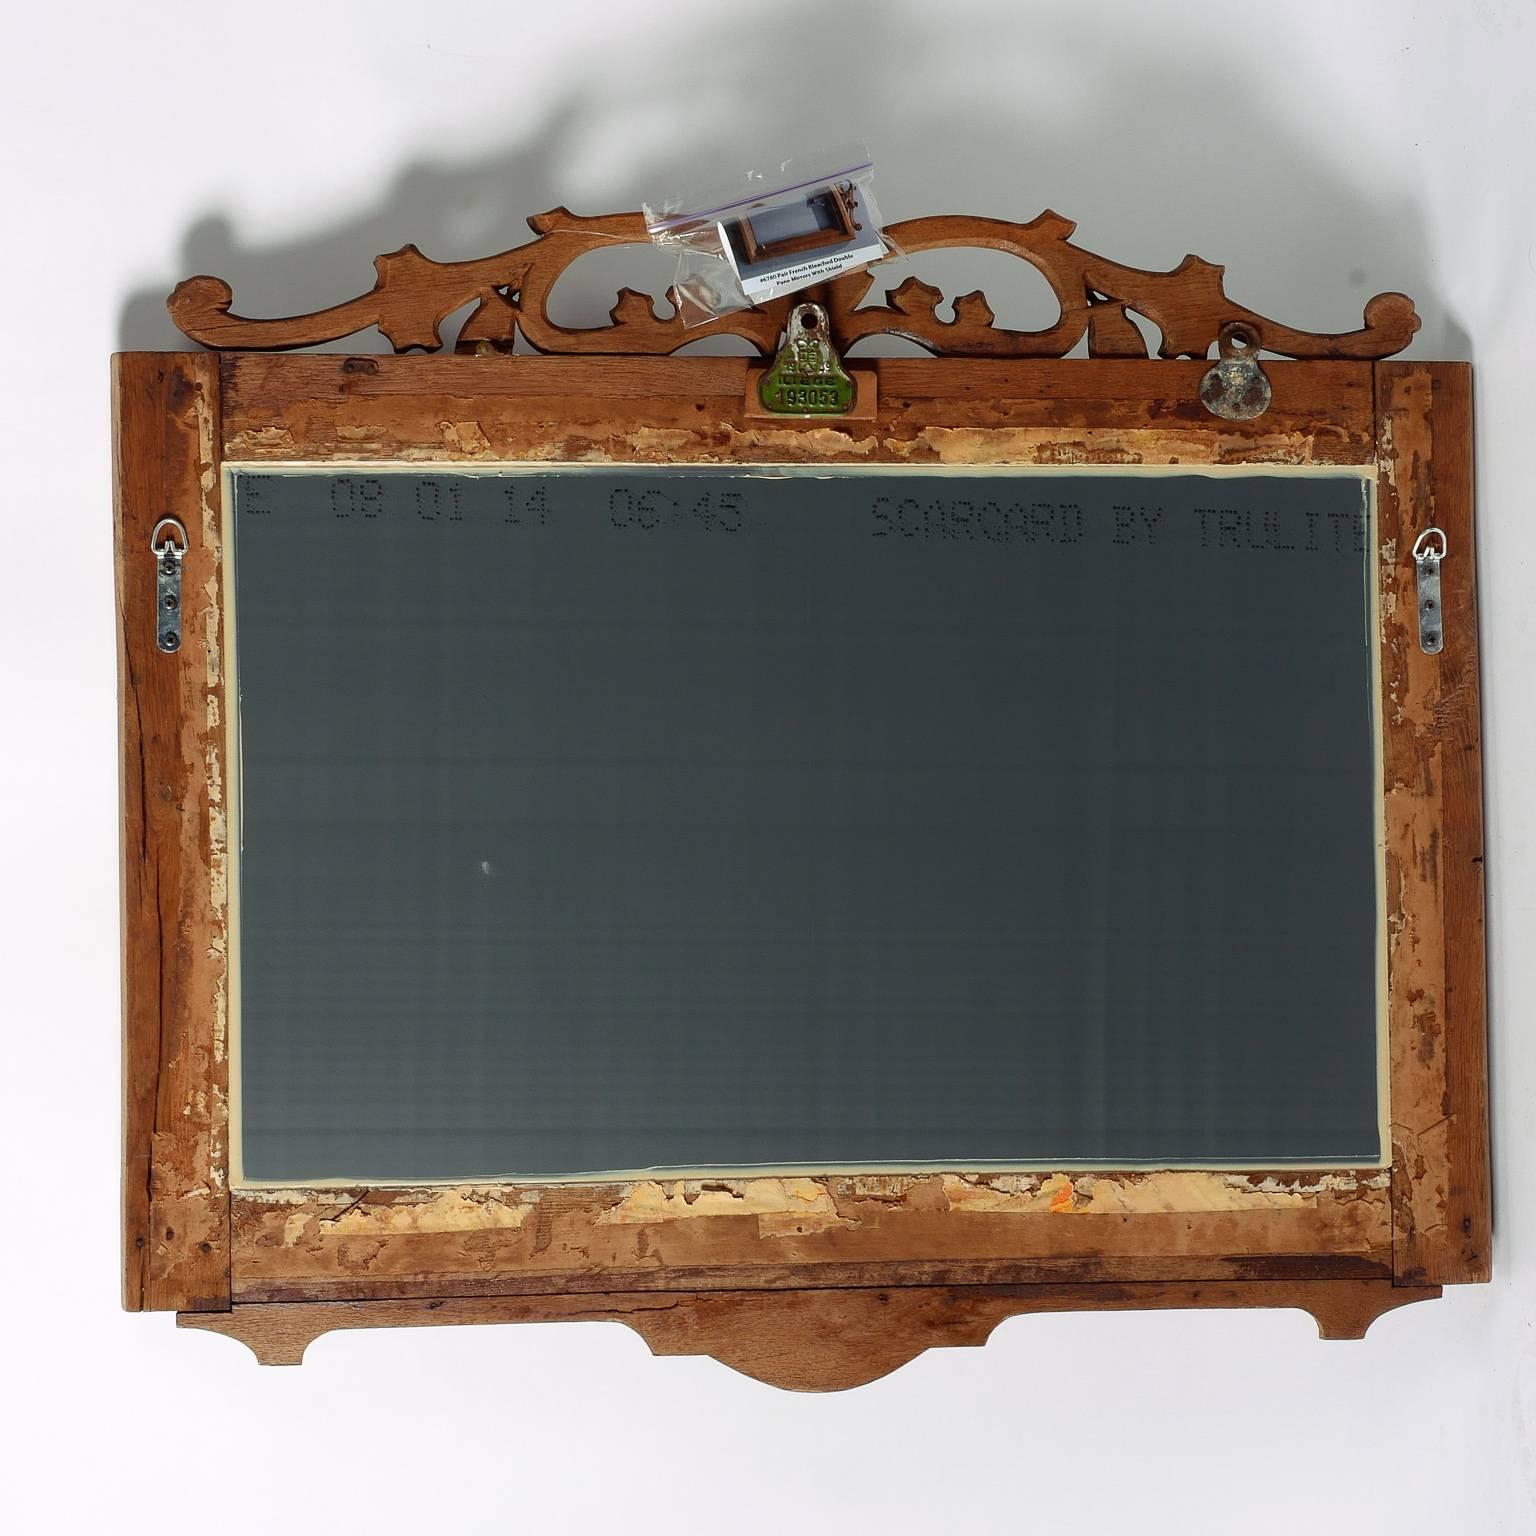 French pair of mirrors have bleached wood double pane frame with carved, open work detail including shield at the crest, circa 1900. Sold and priced as a pair.